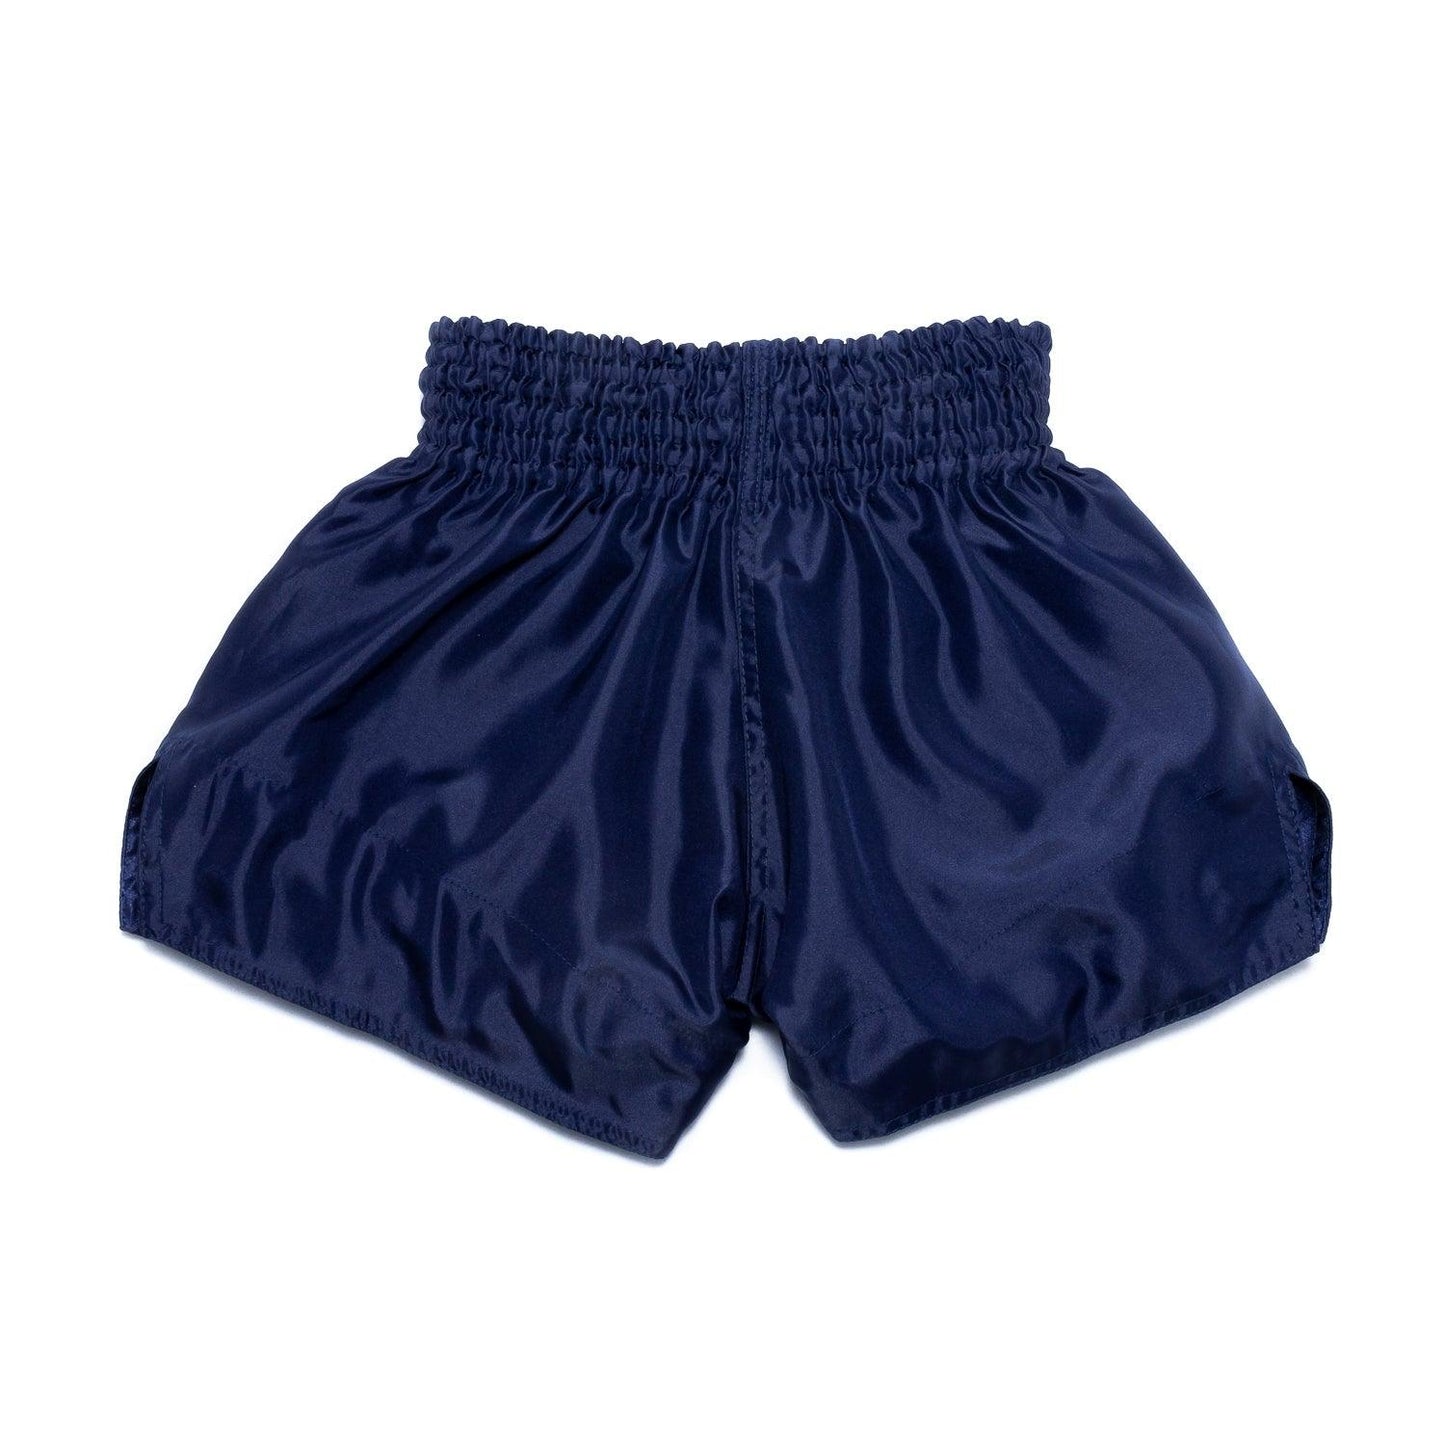 FS Classic Retro Short - Navy Blue - InFightStyle Canada 